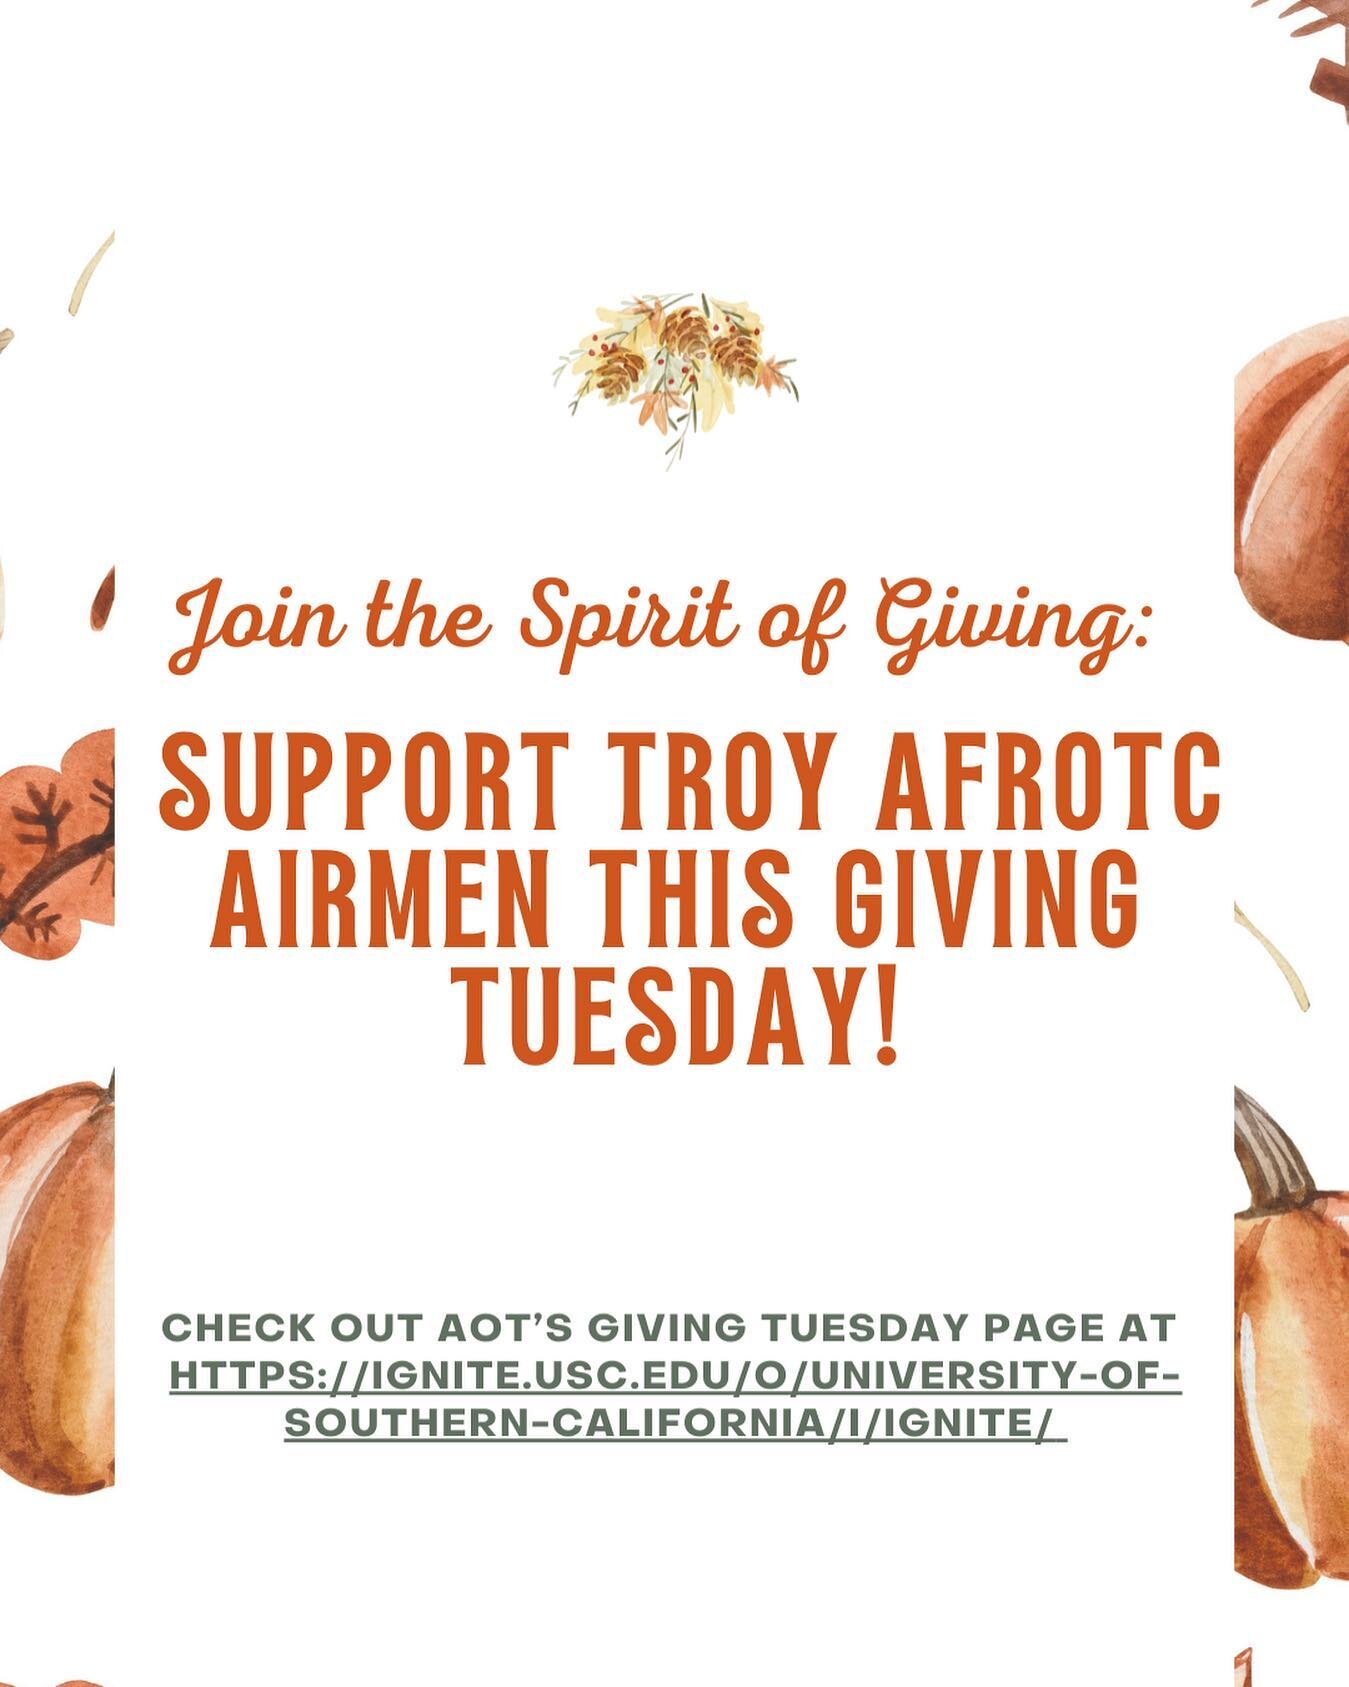 Want to support the Airmen of Troy? You&rsquo;re in luck because starting tomorrow (21 Nov) our Ignite USC page is going live! Ignite USC is a crowdfunding program designed to help raise funding and awareness for a variety of USC affiliated projects 